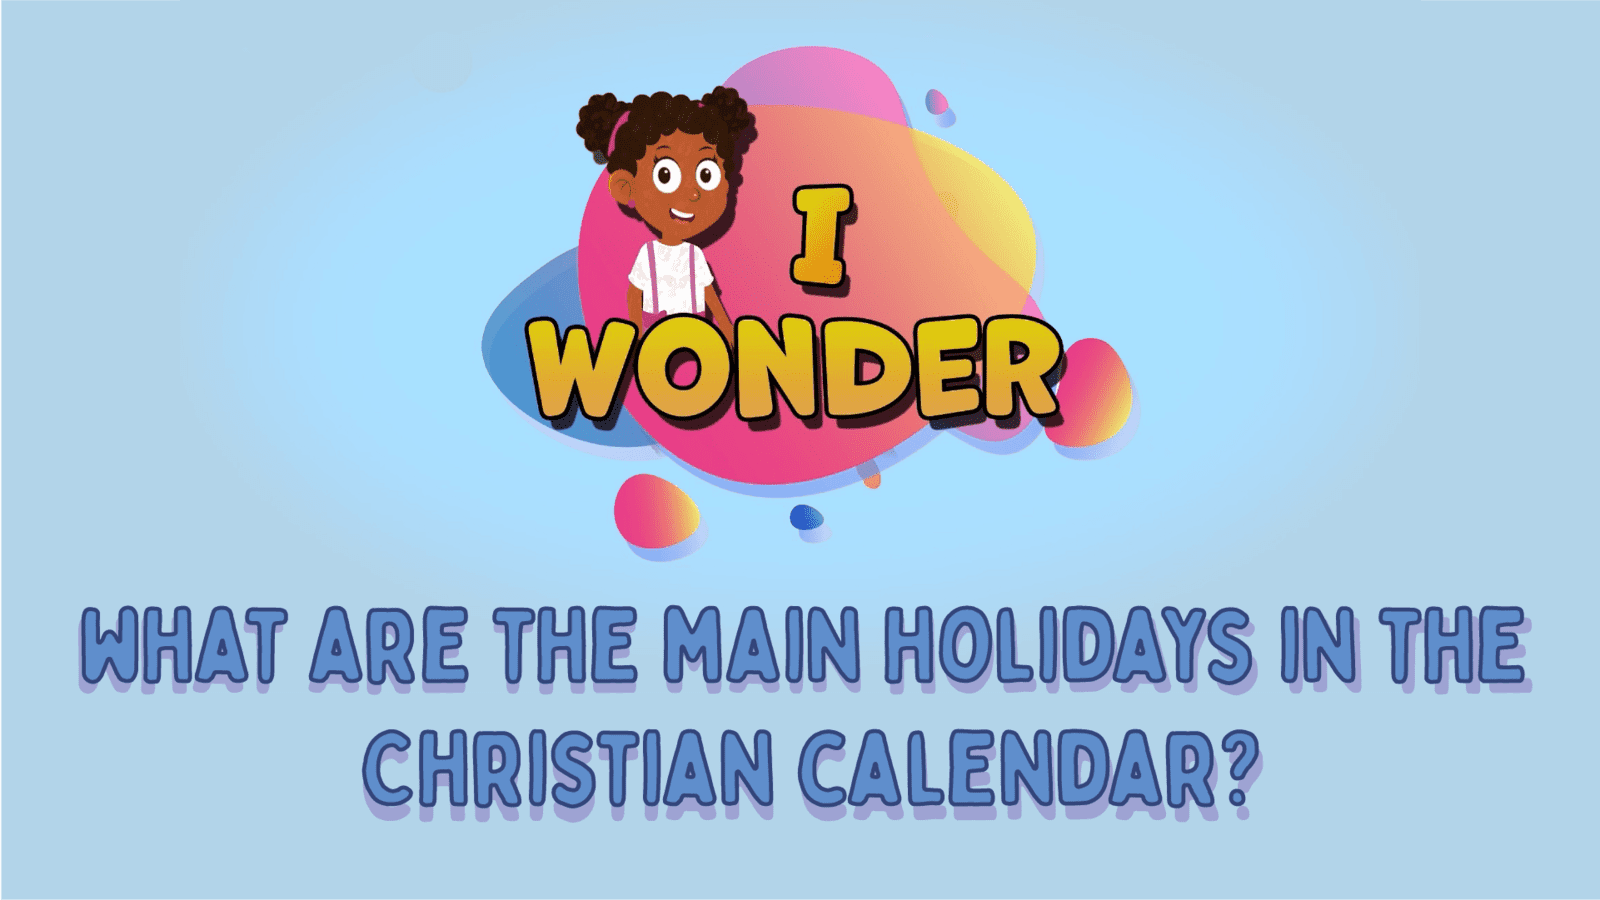 What Are The Main Holidays In The Christian Calendar?